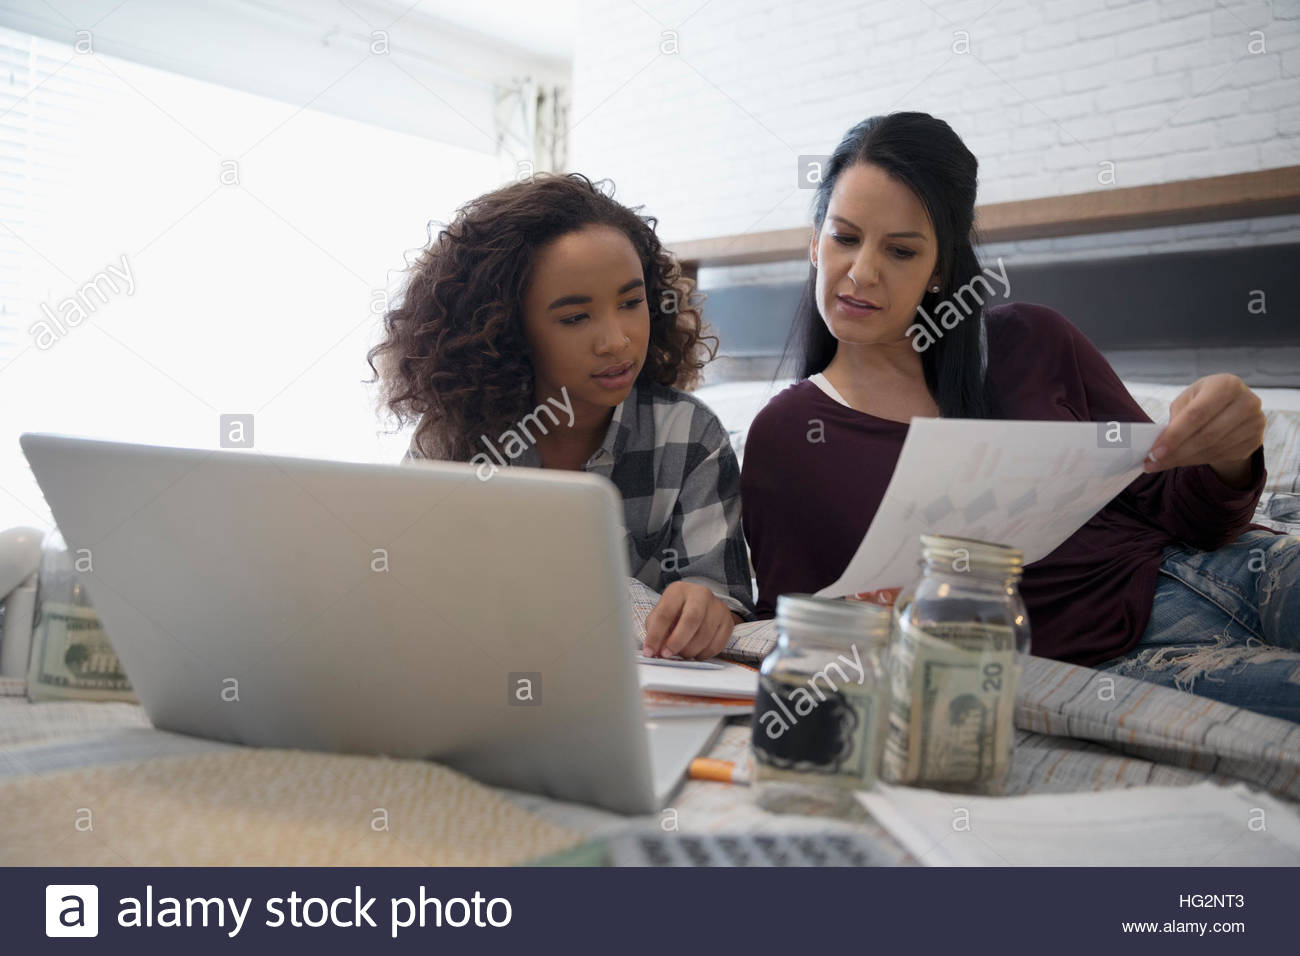 Mother with laptop teaching daughter personal finance management on bed Stock Photo